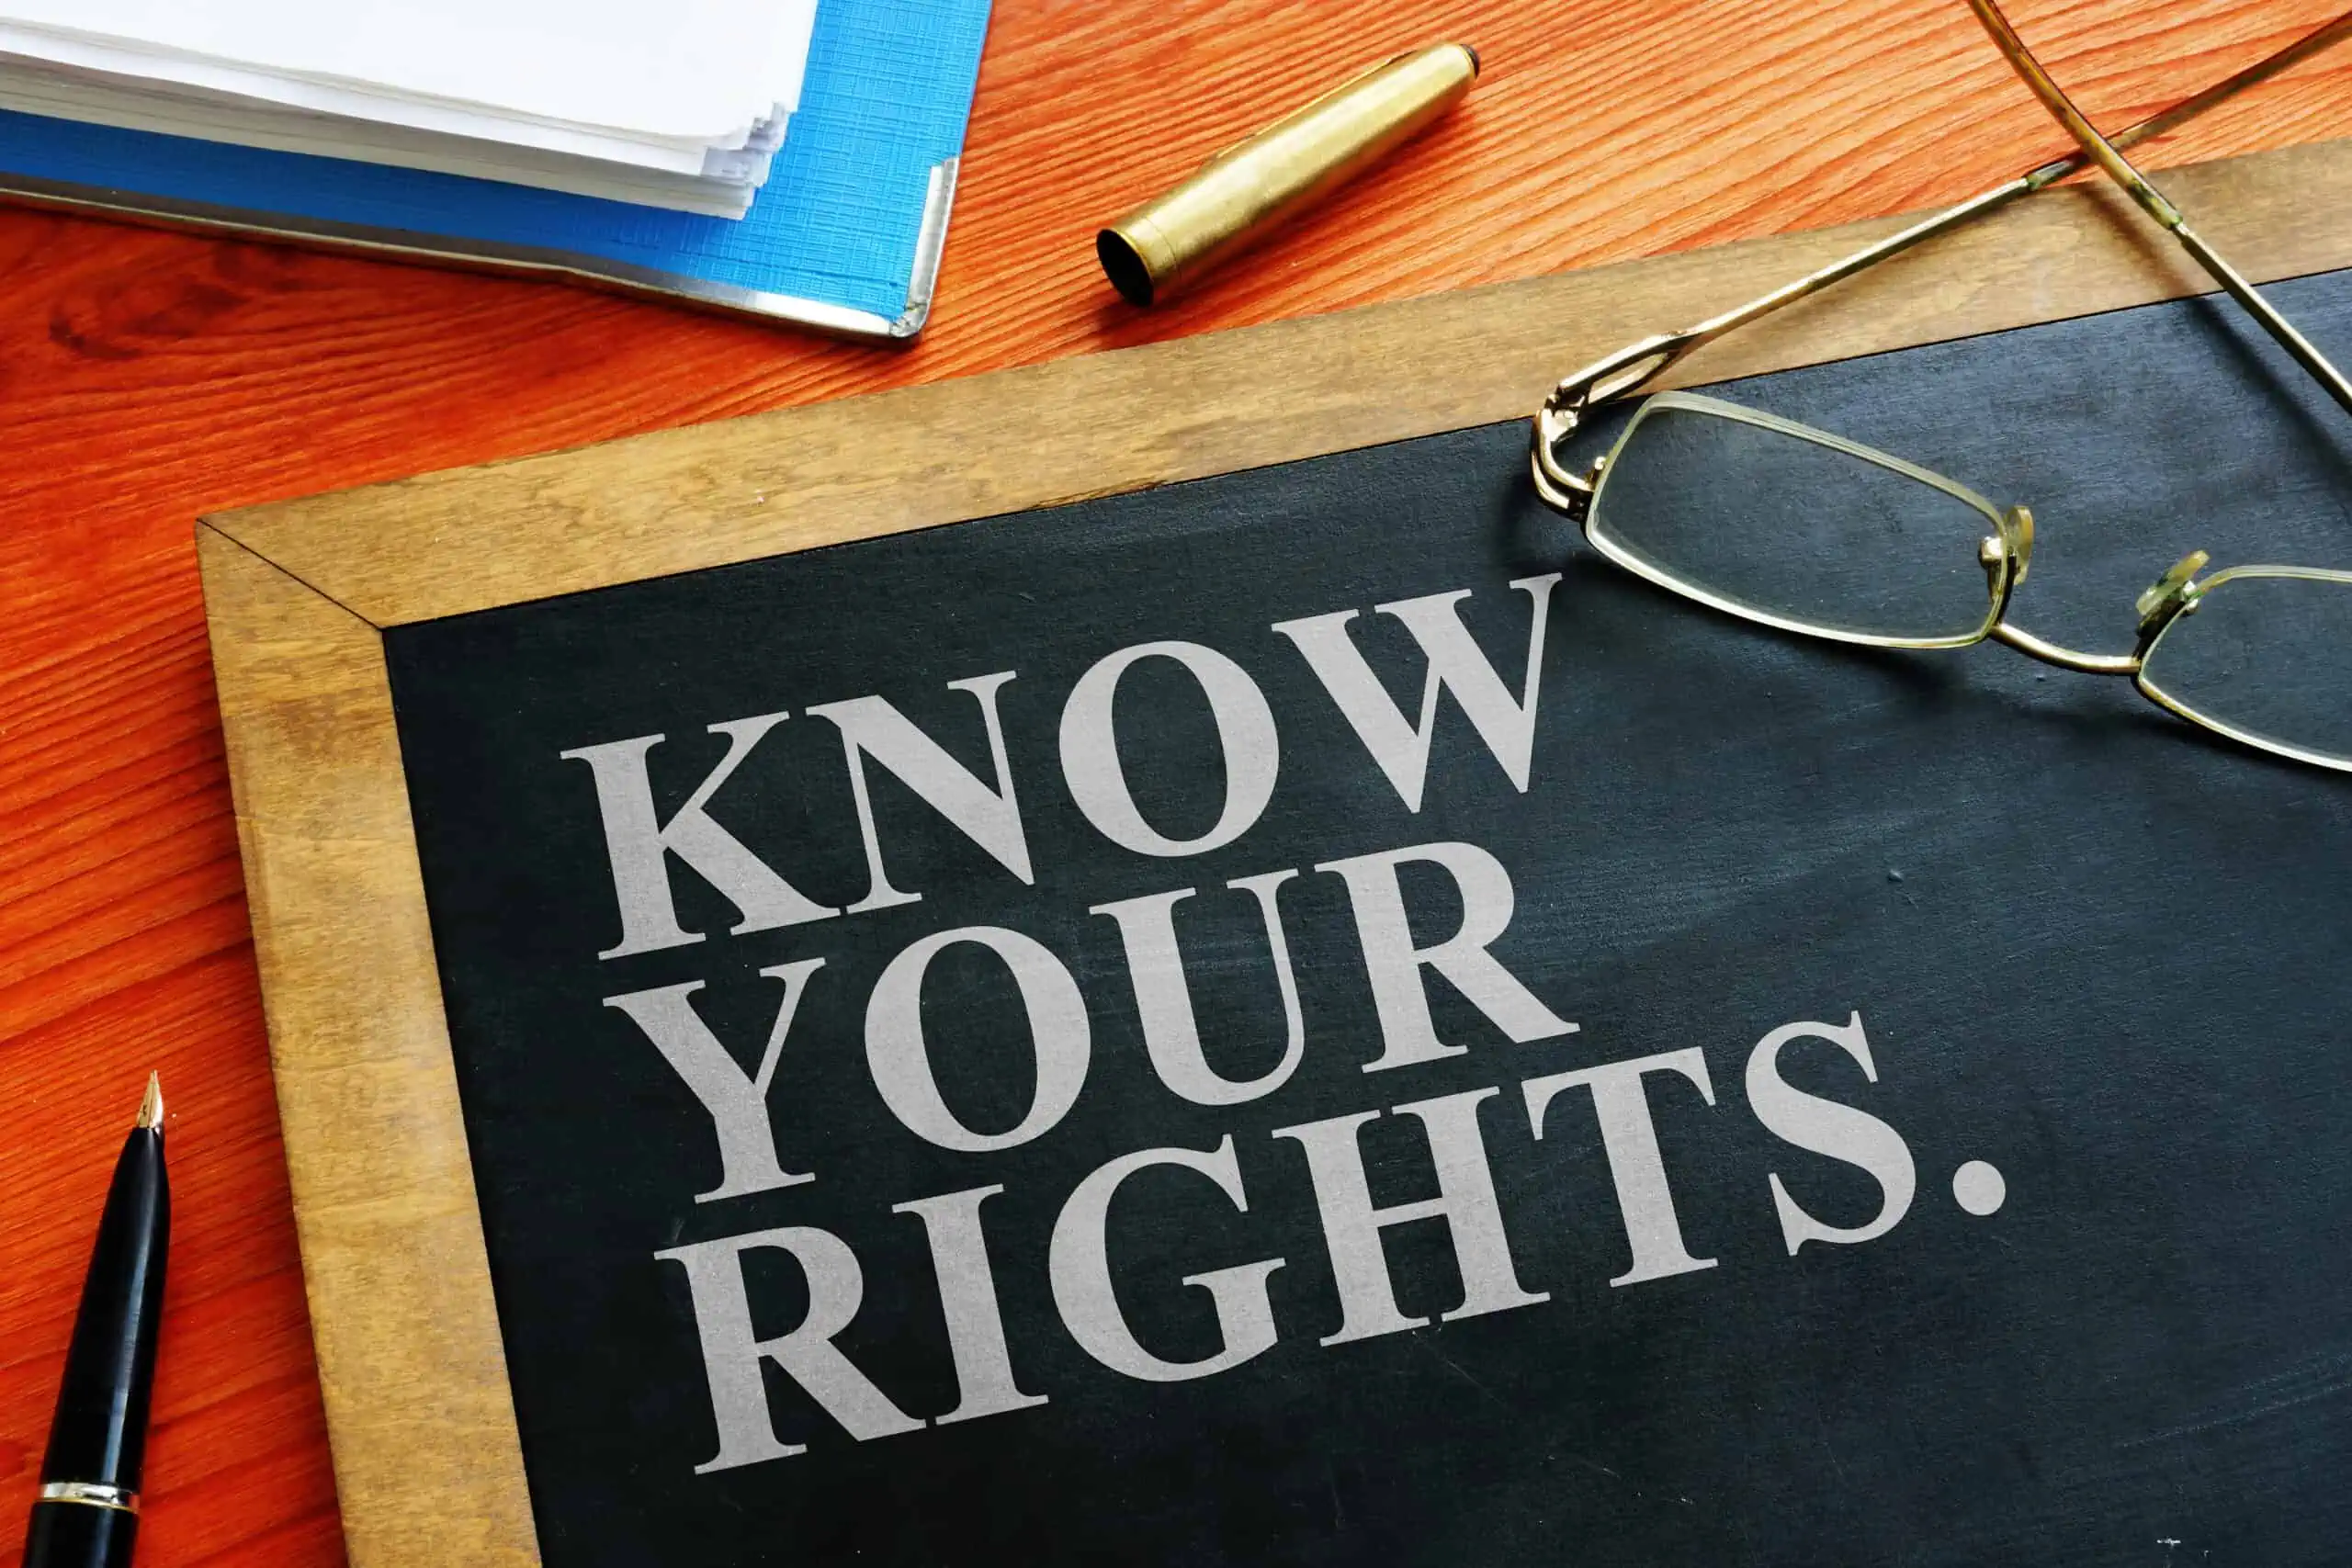 Know your rights as a player sign.